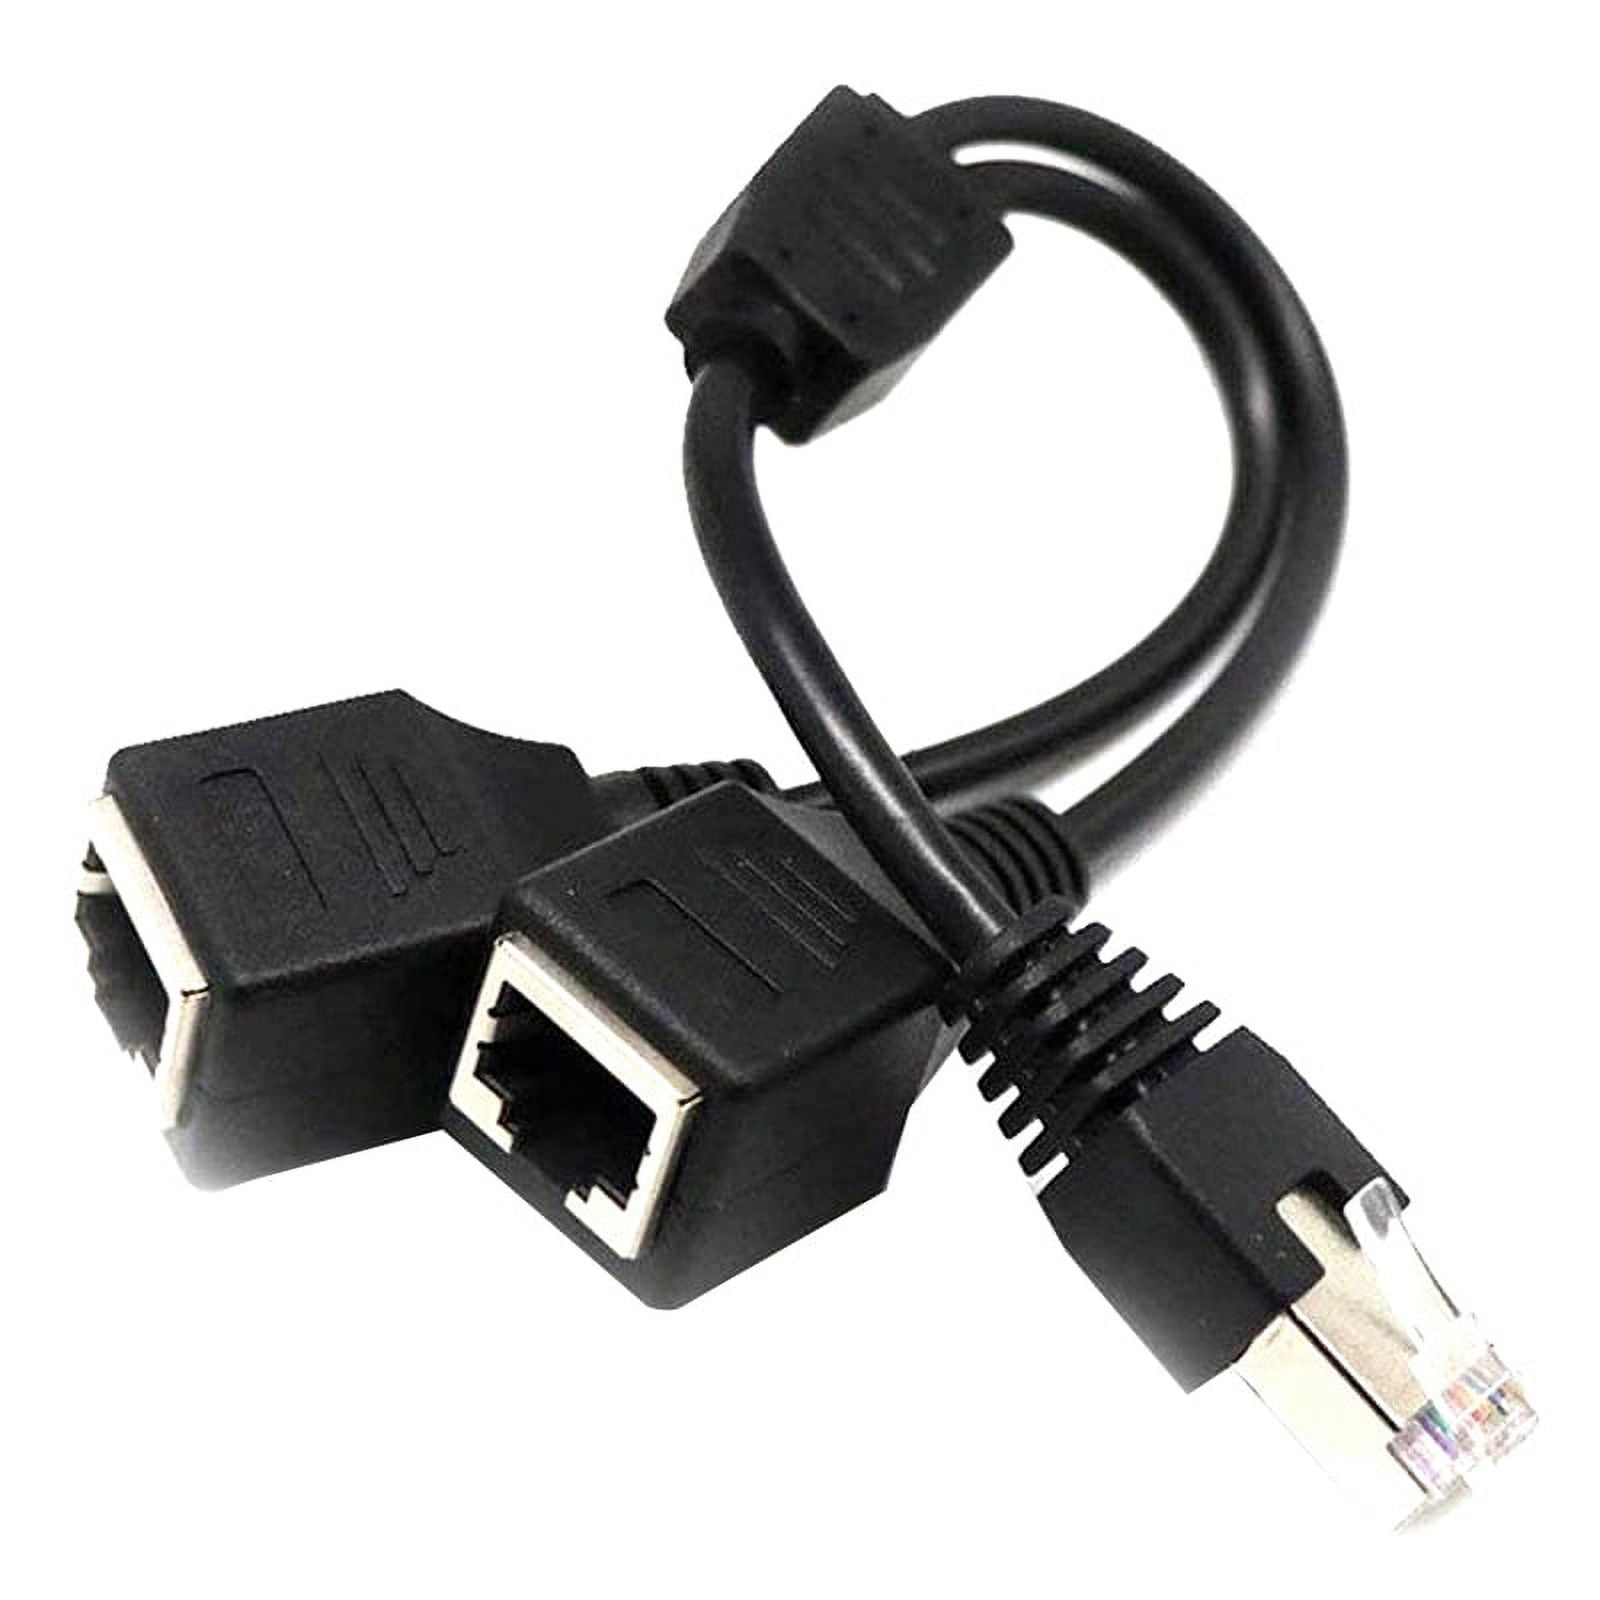 RJ45 Ethernet Splitter Ethernet Cable Extender RJ45 Splitter Adapter for  Cat6 Cat7 Cat5 Cat5E Cat8 Computer Networking Switches - AliExpress